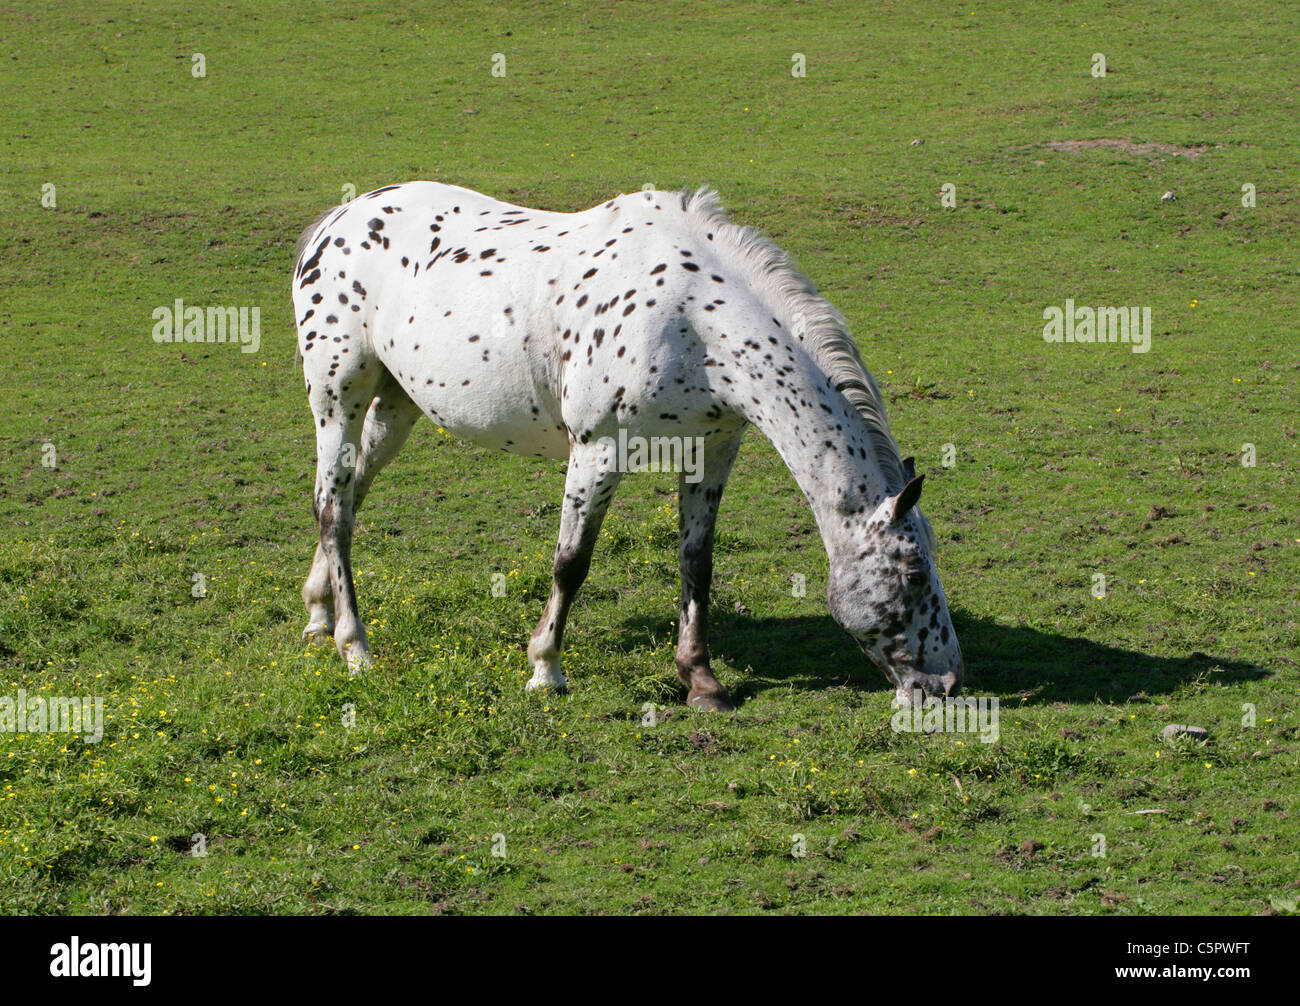 White Horse with Black Spots Grazing in a Field. Stock Photo